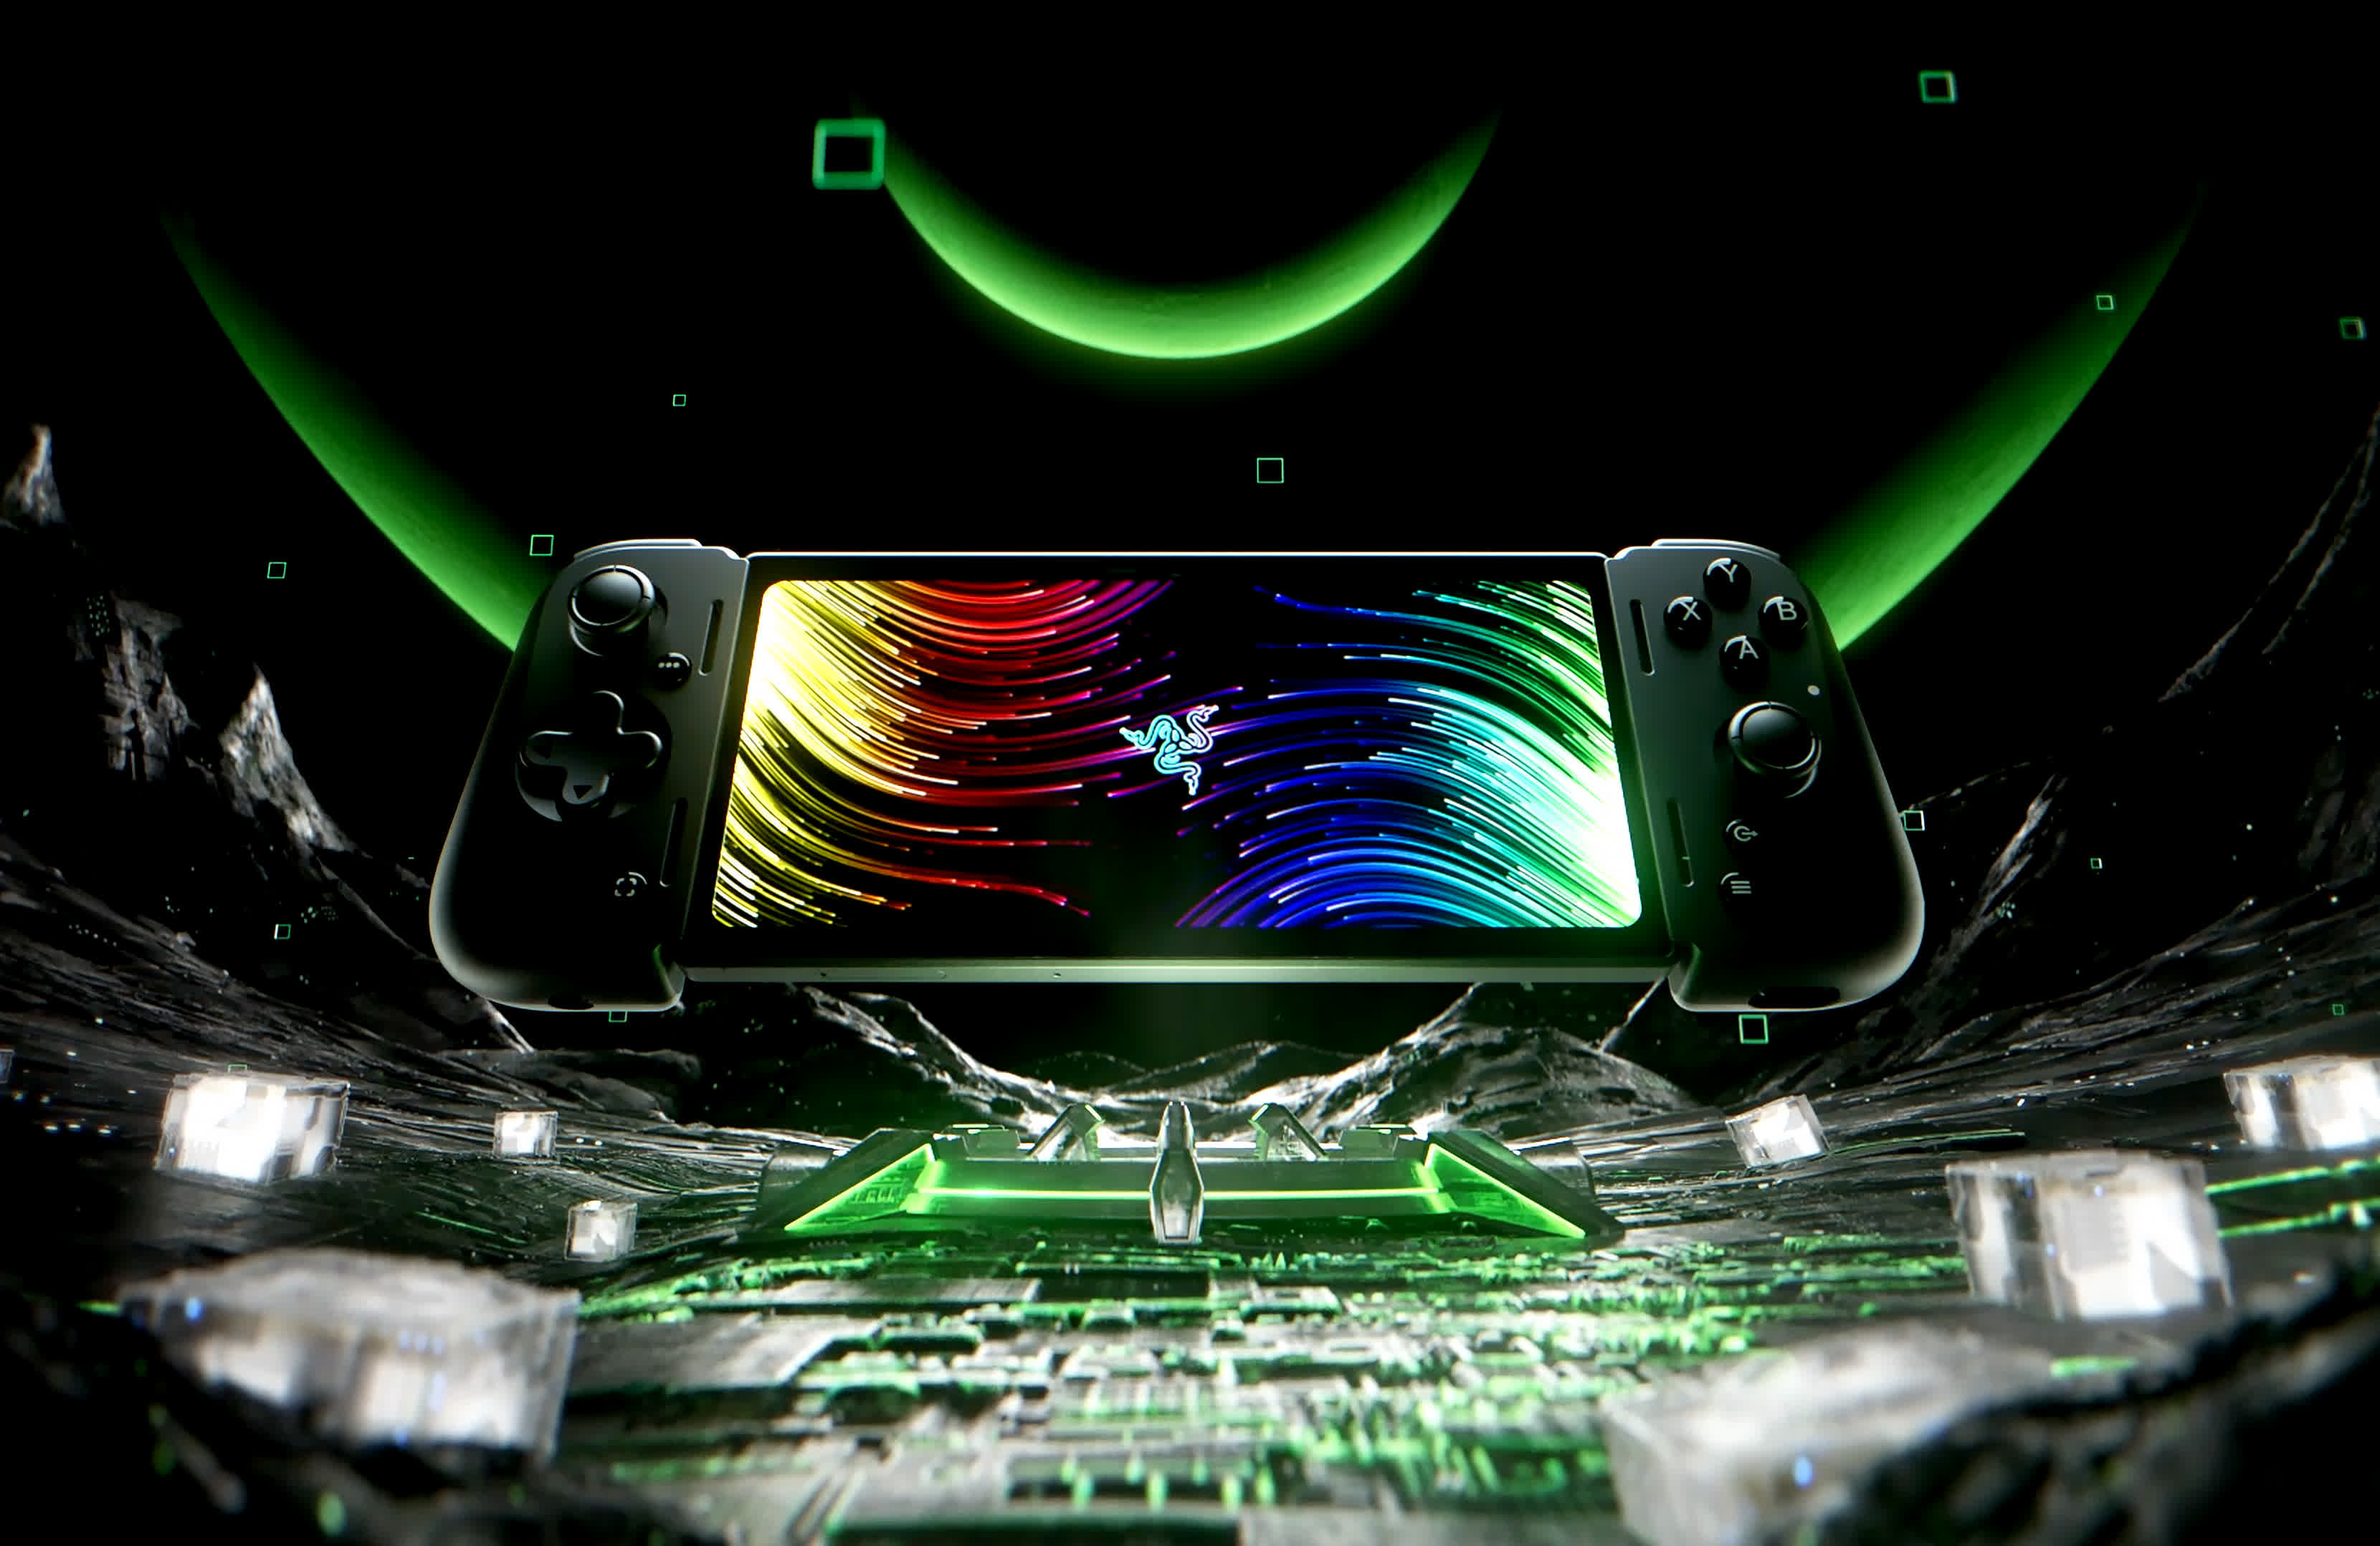 Razer's cloud-based gaming handheld launches later this month